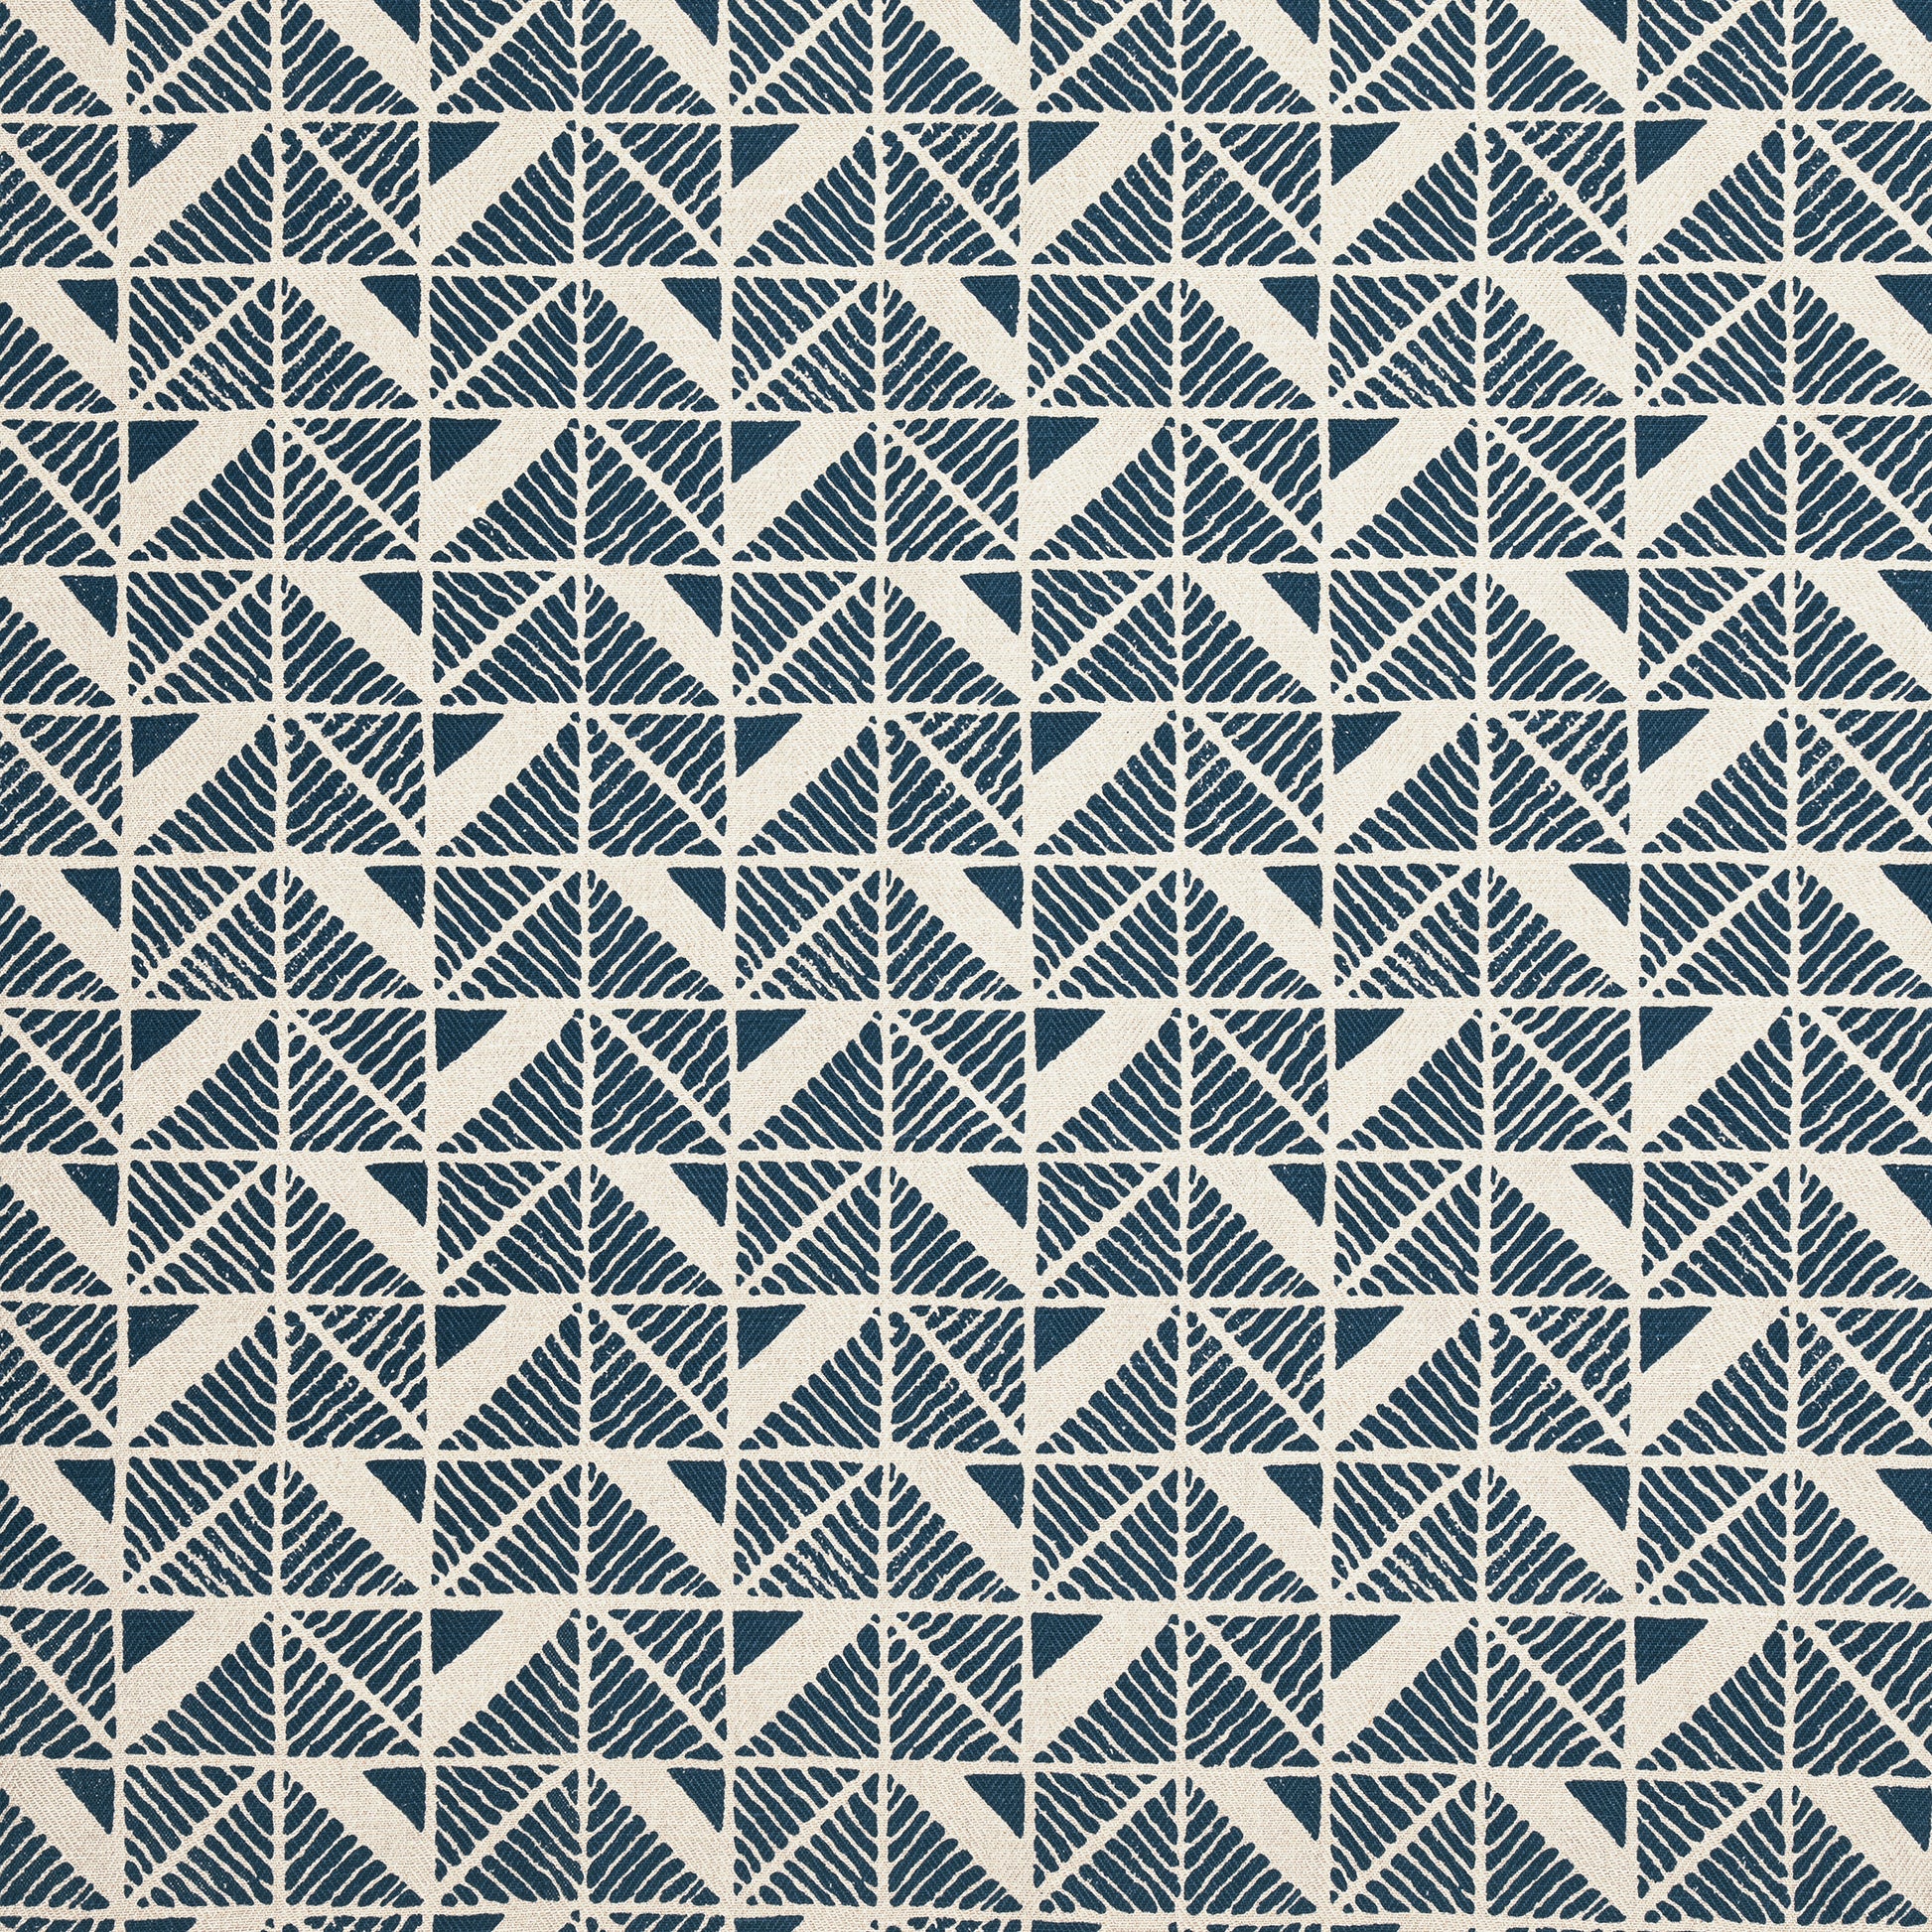 Purchase  Ann French Fabric Pattern number AF23119  pattern name  Bloomsbury Square